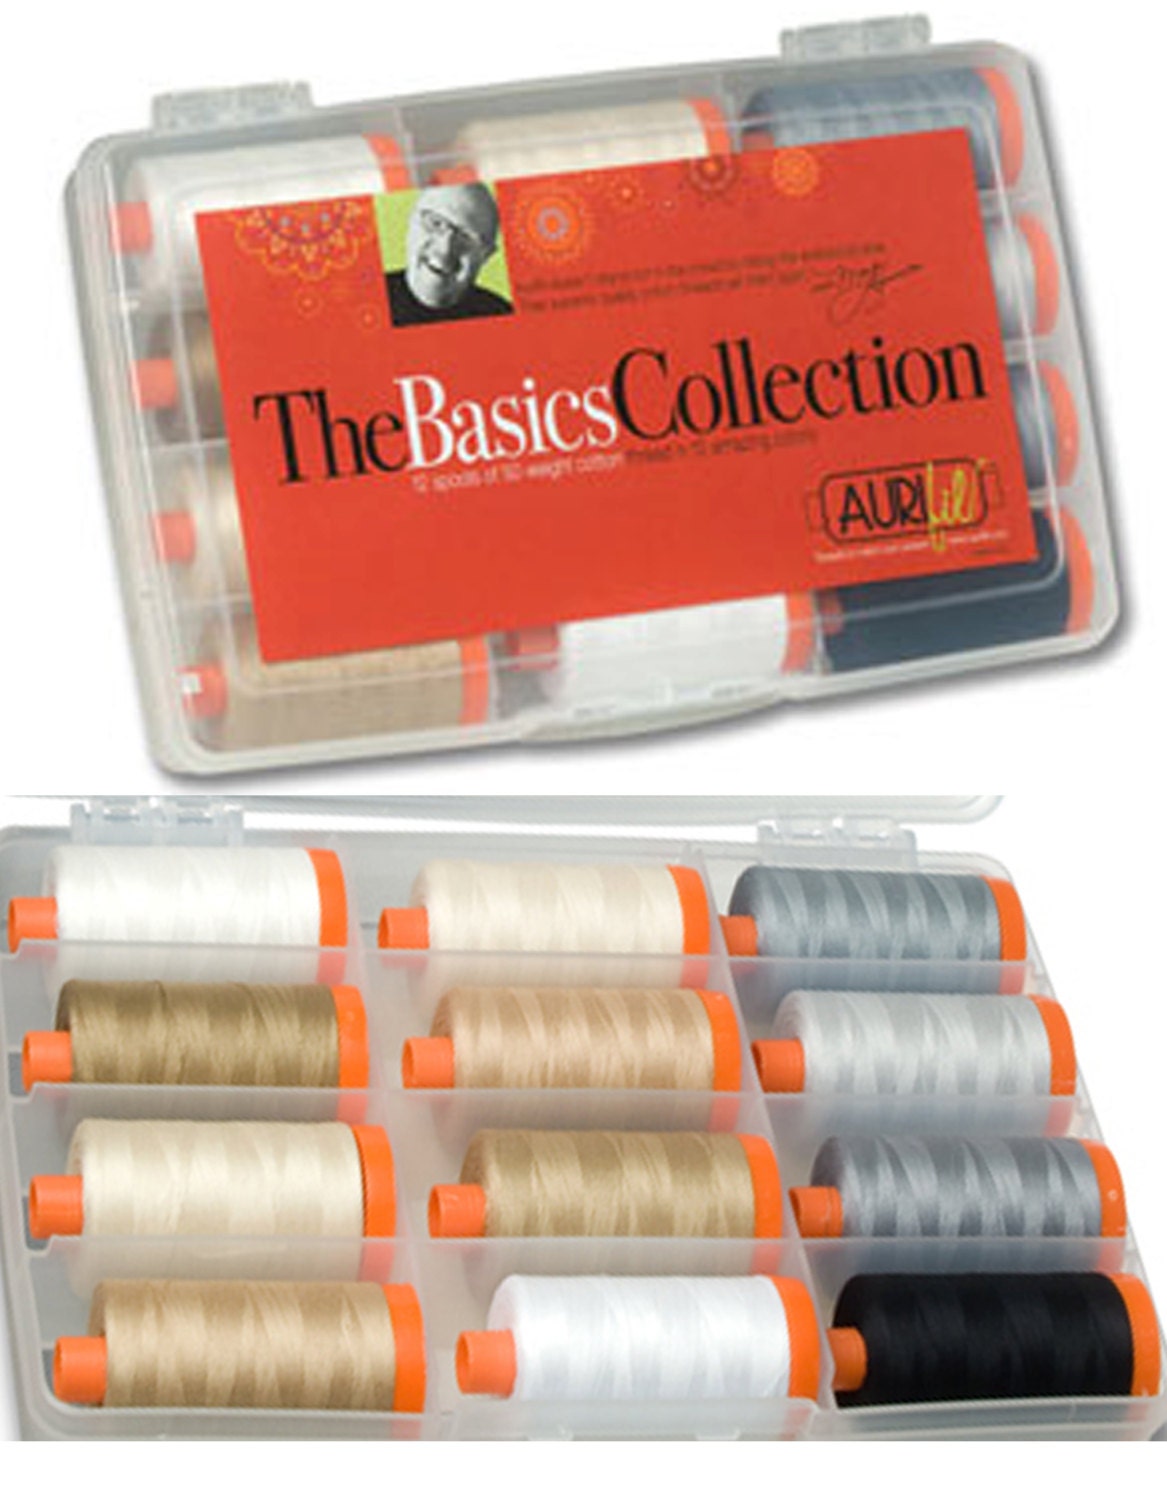 Poly-Cotton Sewing thread Production. Collection thread